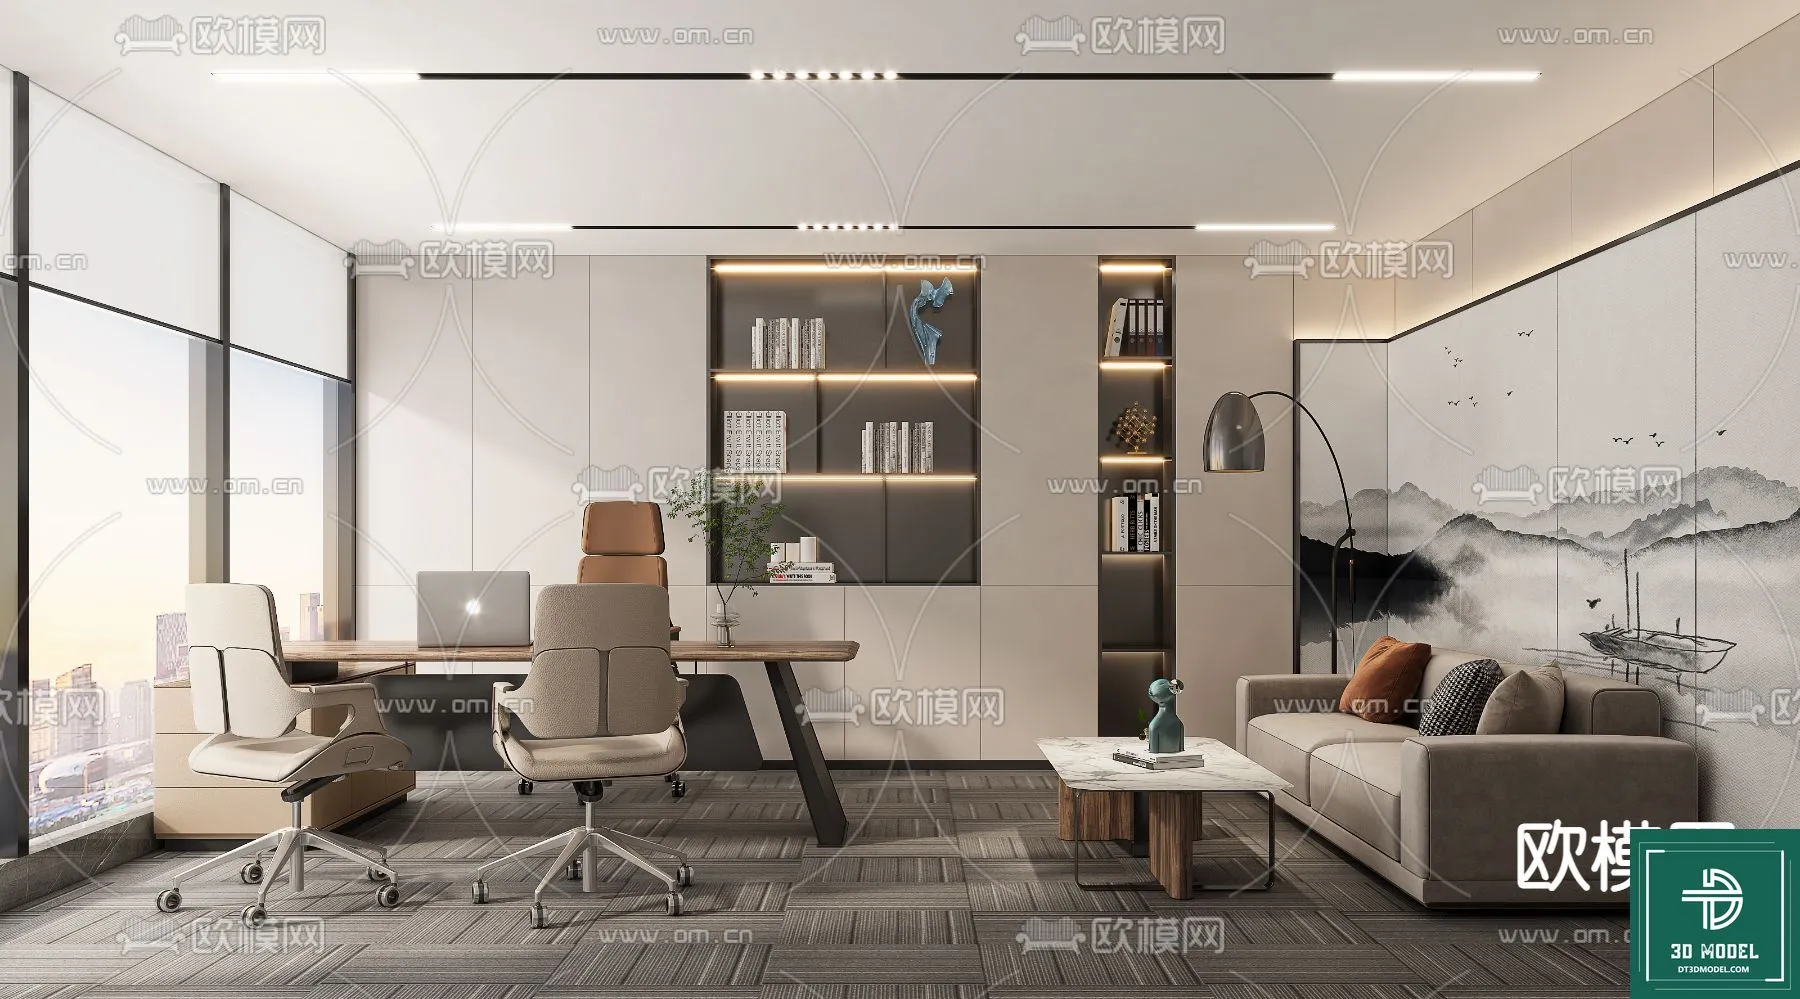 OFFICE ROOM FOR MANAGER – 3DMODEL – 085